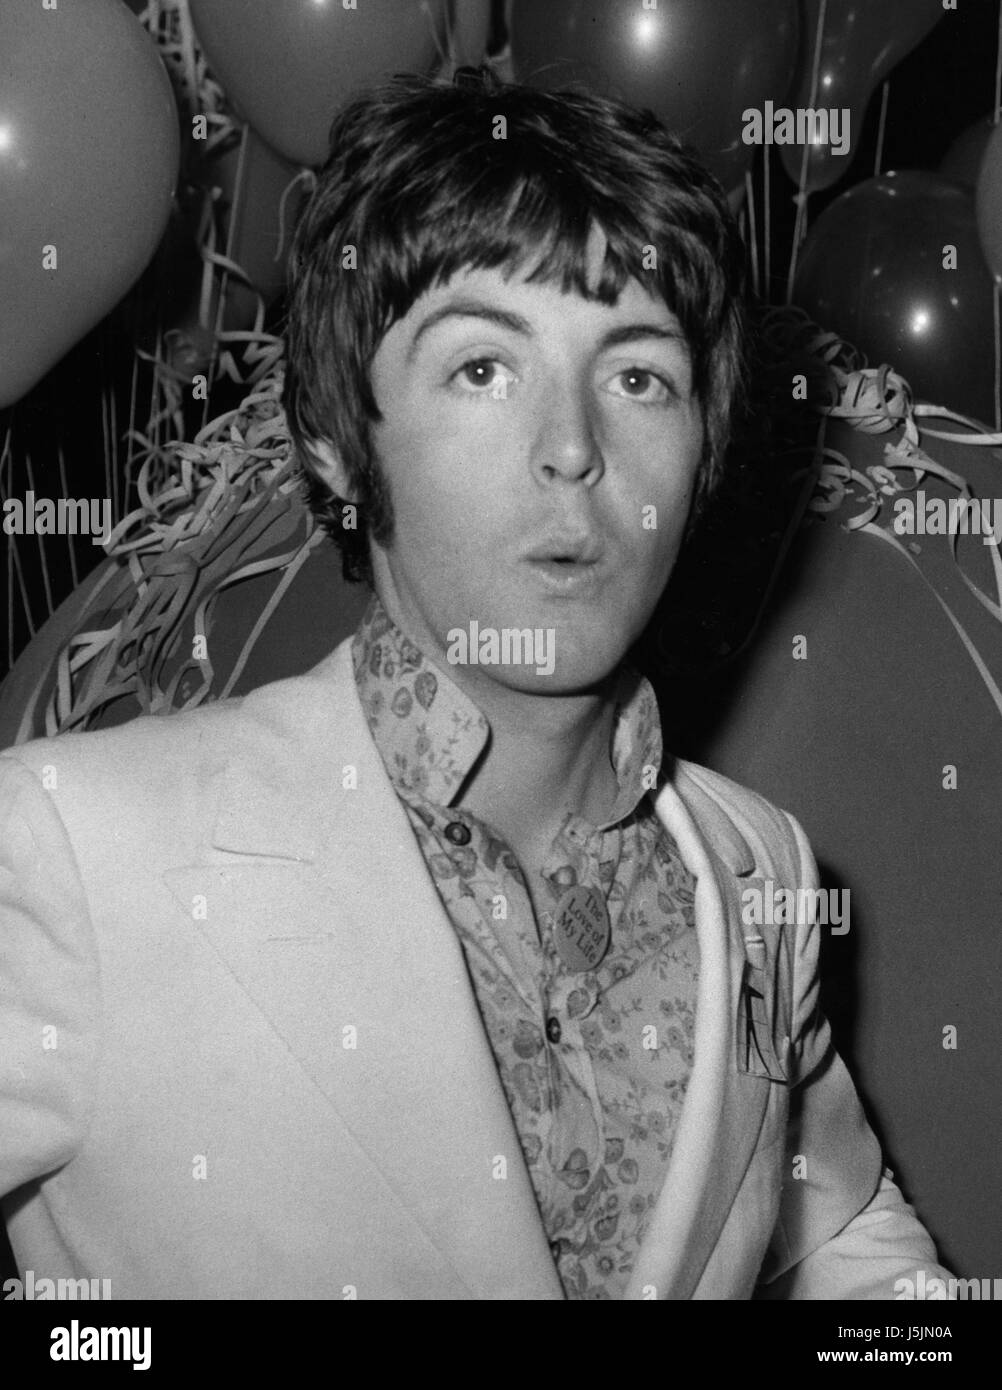 Paul McCartney during rehearsals at the EMI Studios, St John's Wood, London, for the Beatles appearance in the international television programme 'Our World'. *Scanned from Print Stock Photo